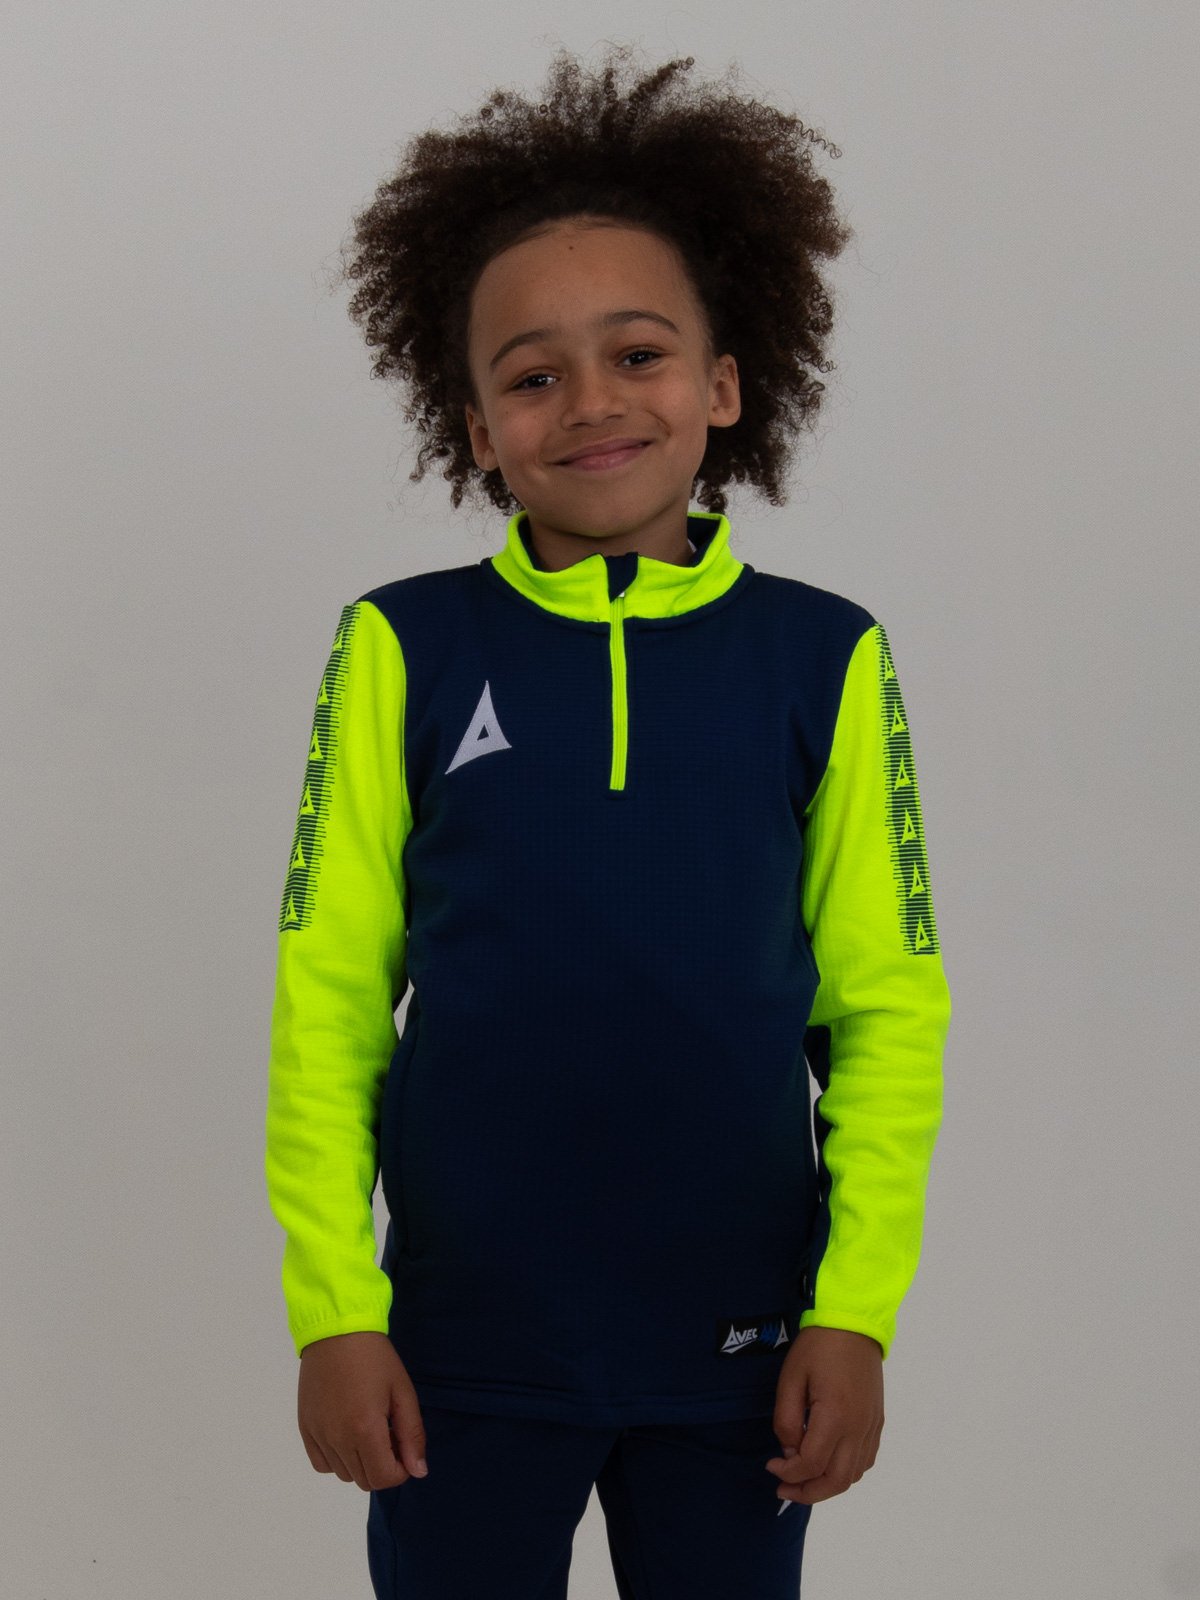 a kids navy blue jumper with yellow sleeves makes this young boy stand out from the crowd.